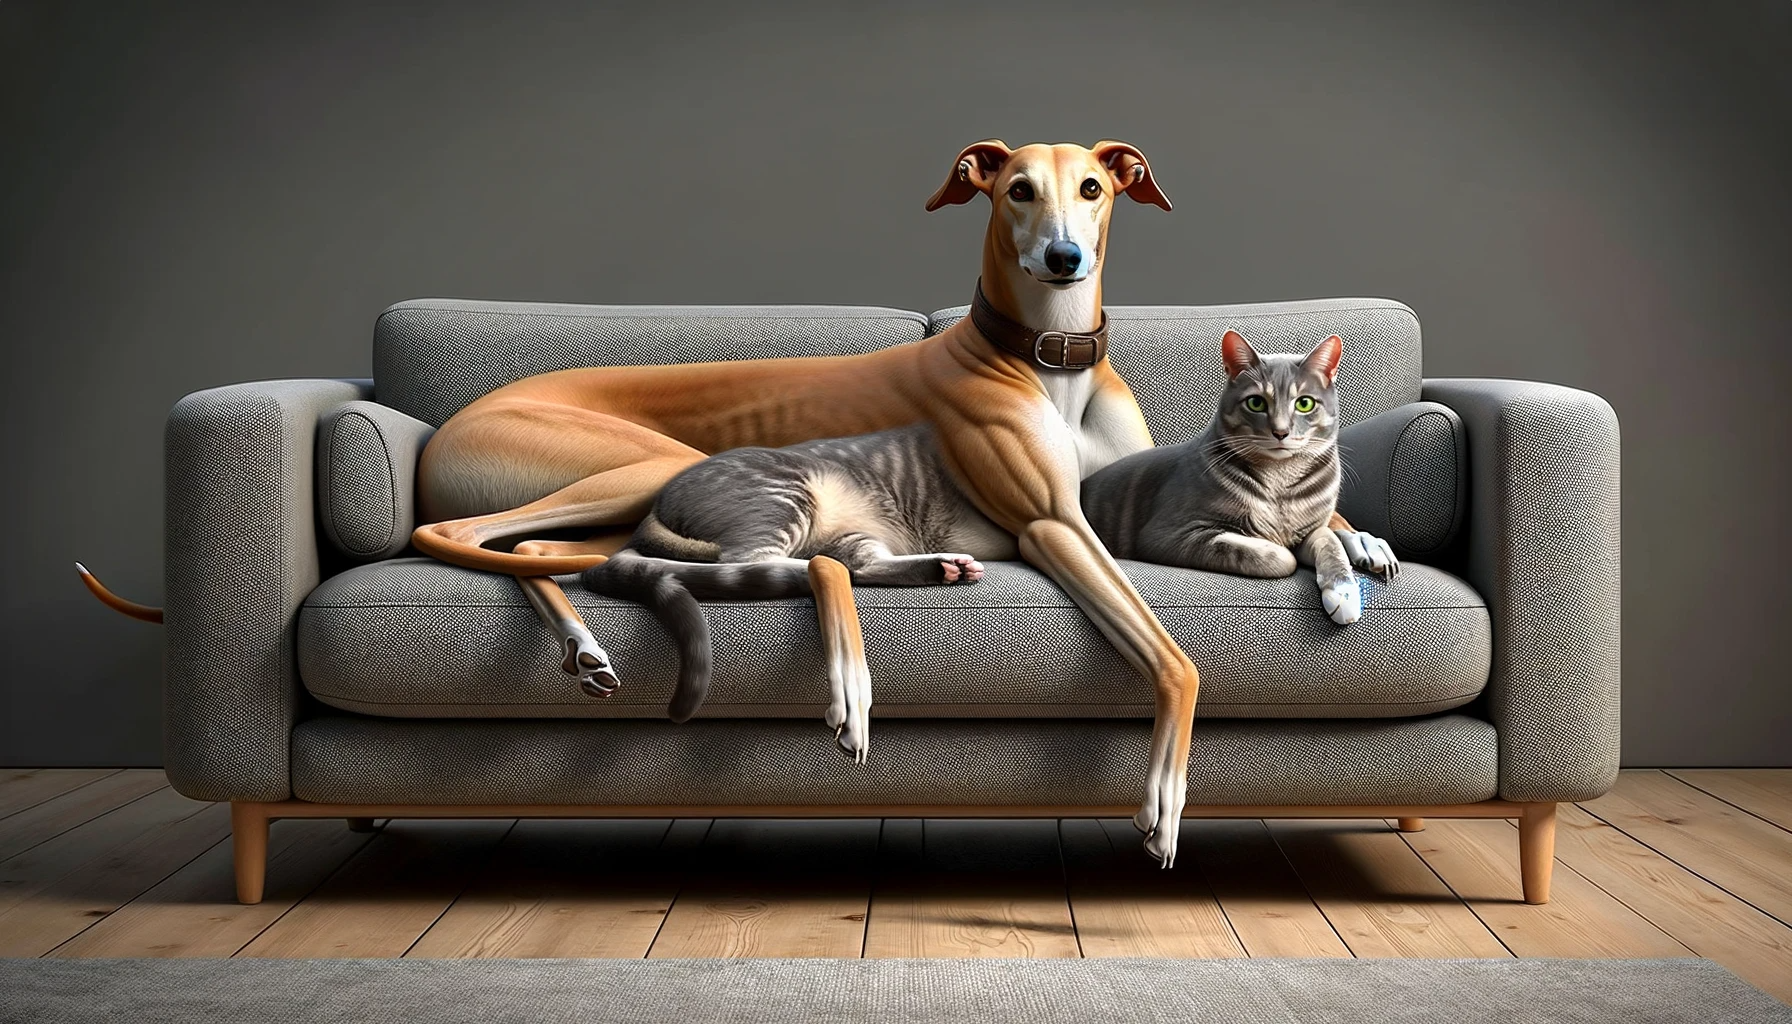 A Greyhound mix with Lab and a cat chilling on the same couch